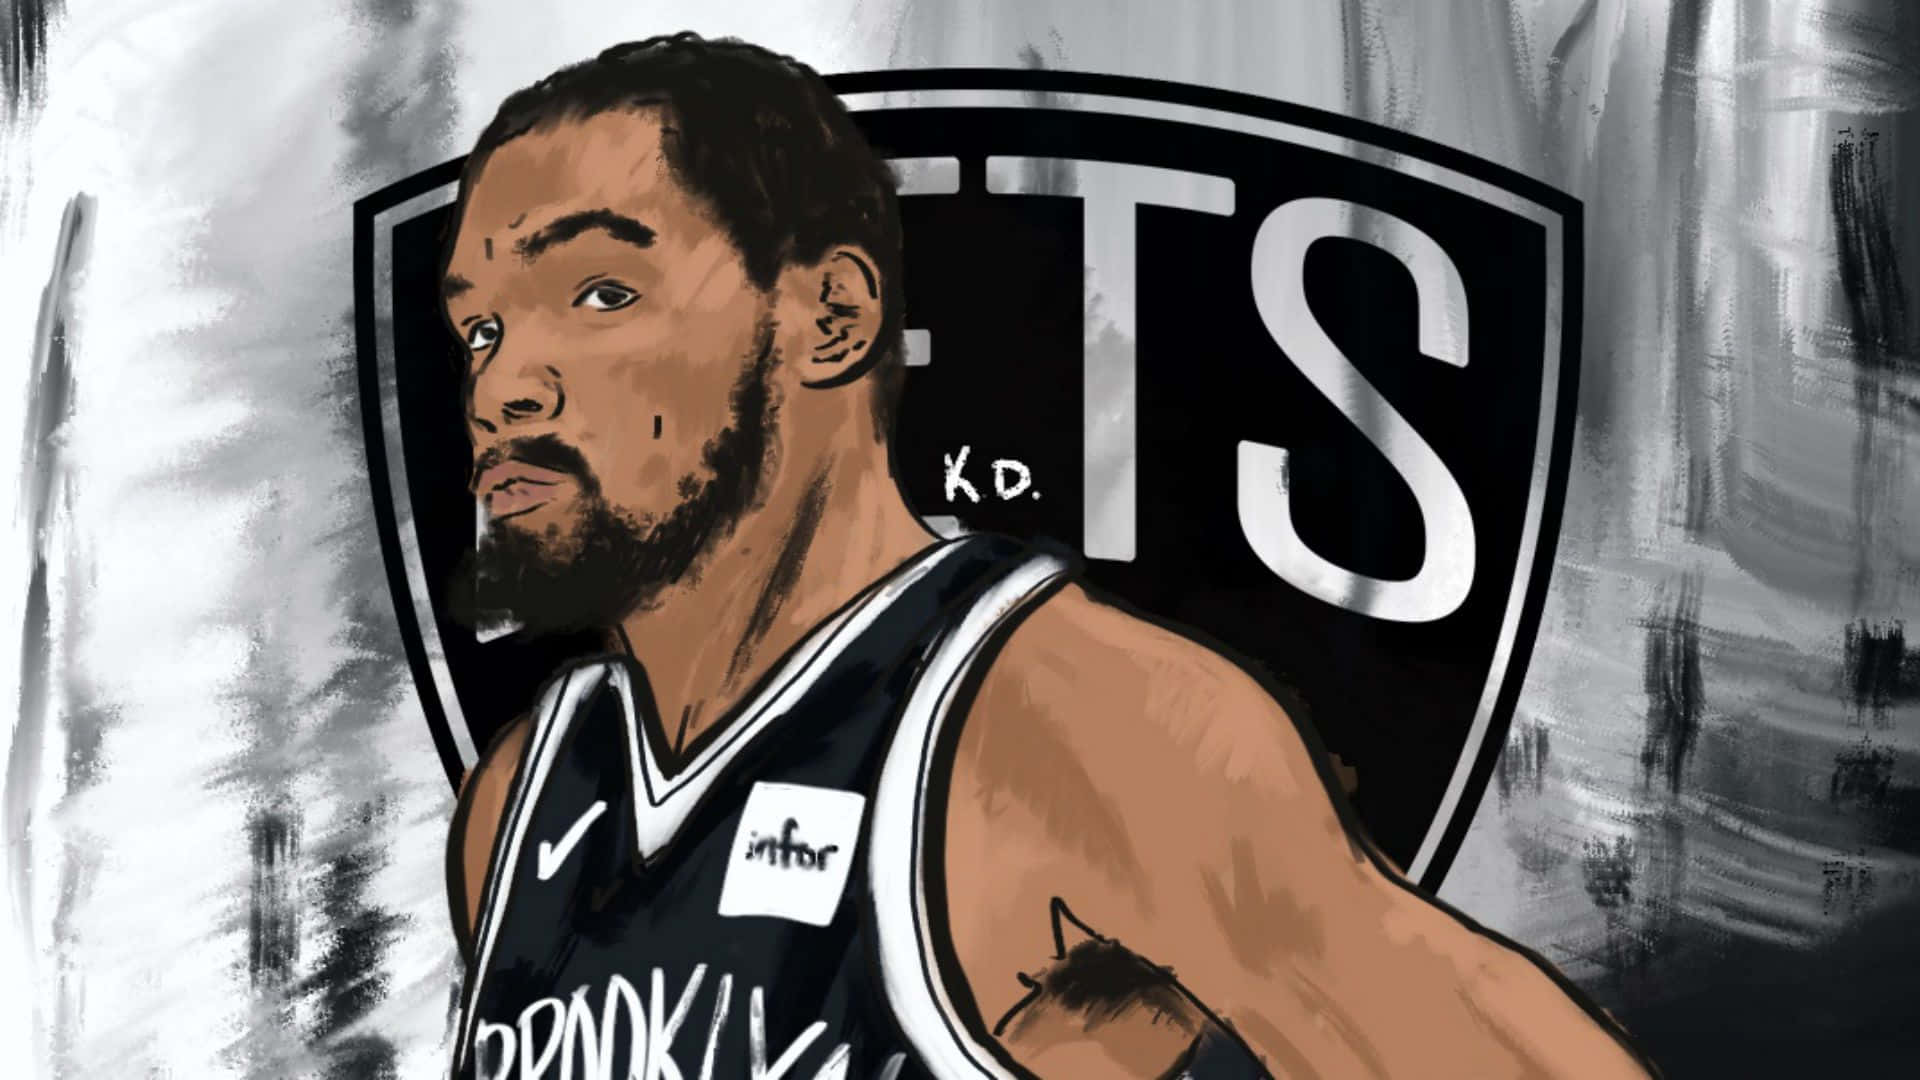 Kevindurant Nets Fan Art Would Be Translated To 